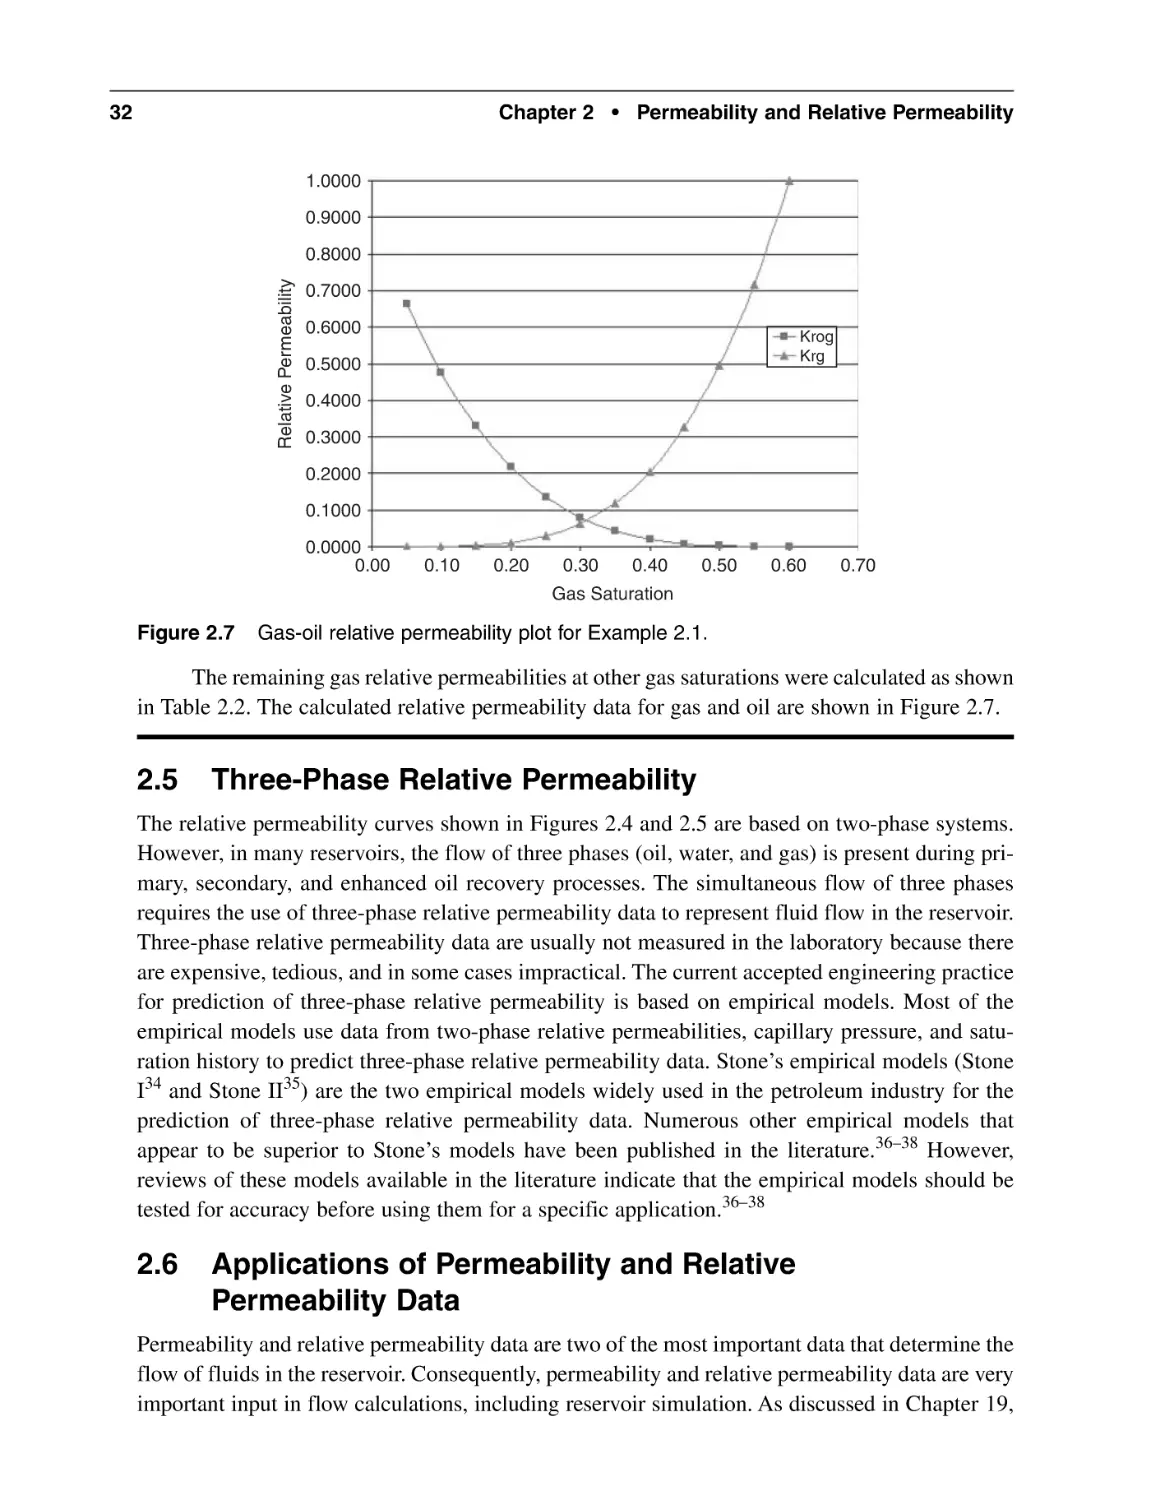 2.5 Three-Phase Relative Permeability
2.6 Applications of Permeability and Relative Permeability Data